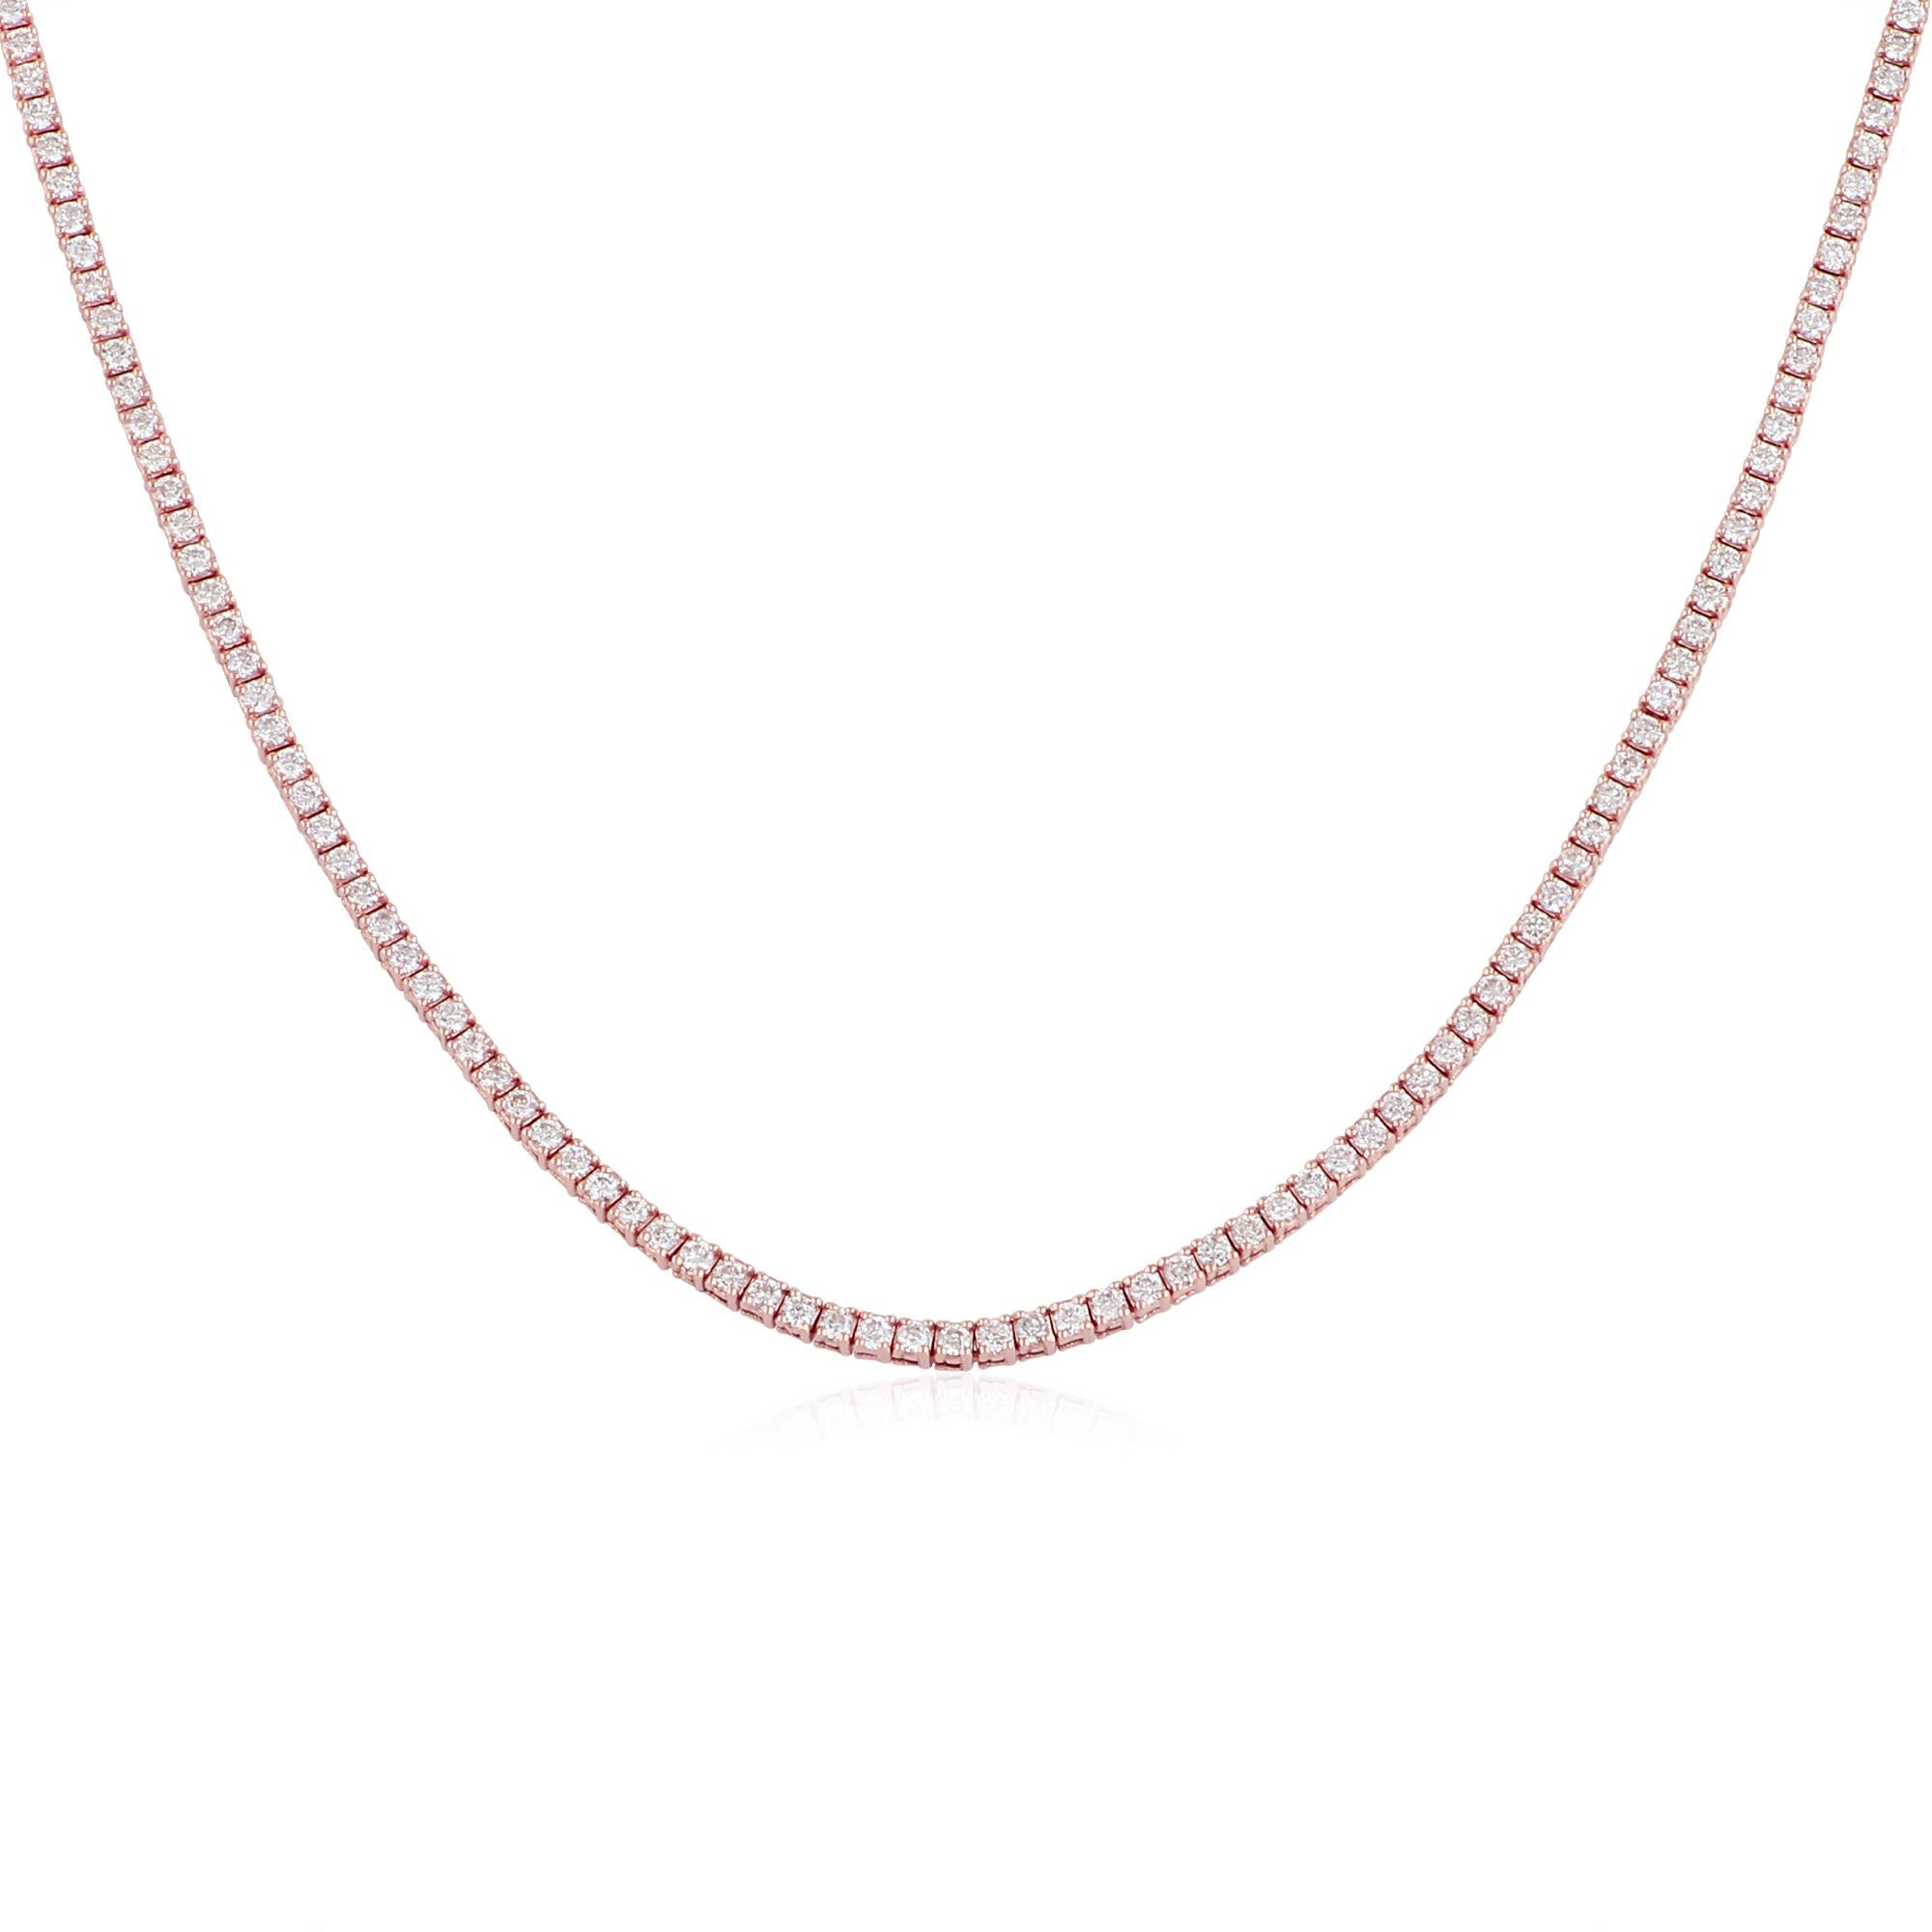 Indulge in the captivating beauty of the 3.60 Carat SI Clarity HI Color Diamond Chain Necklace in 14 Karat Rose Gold. Let the brilliance of the diamonds and the allure of rose gold elevate your style and capture hearts wherever you go. This necklace